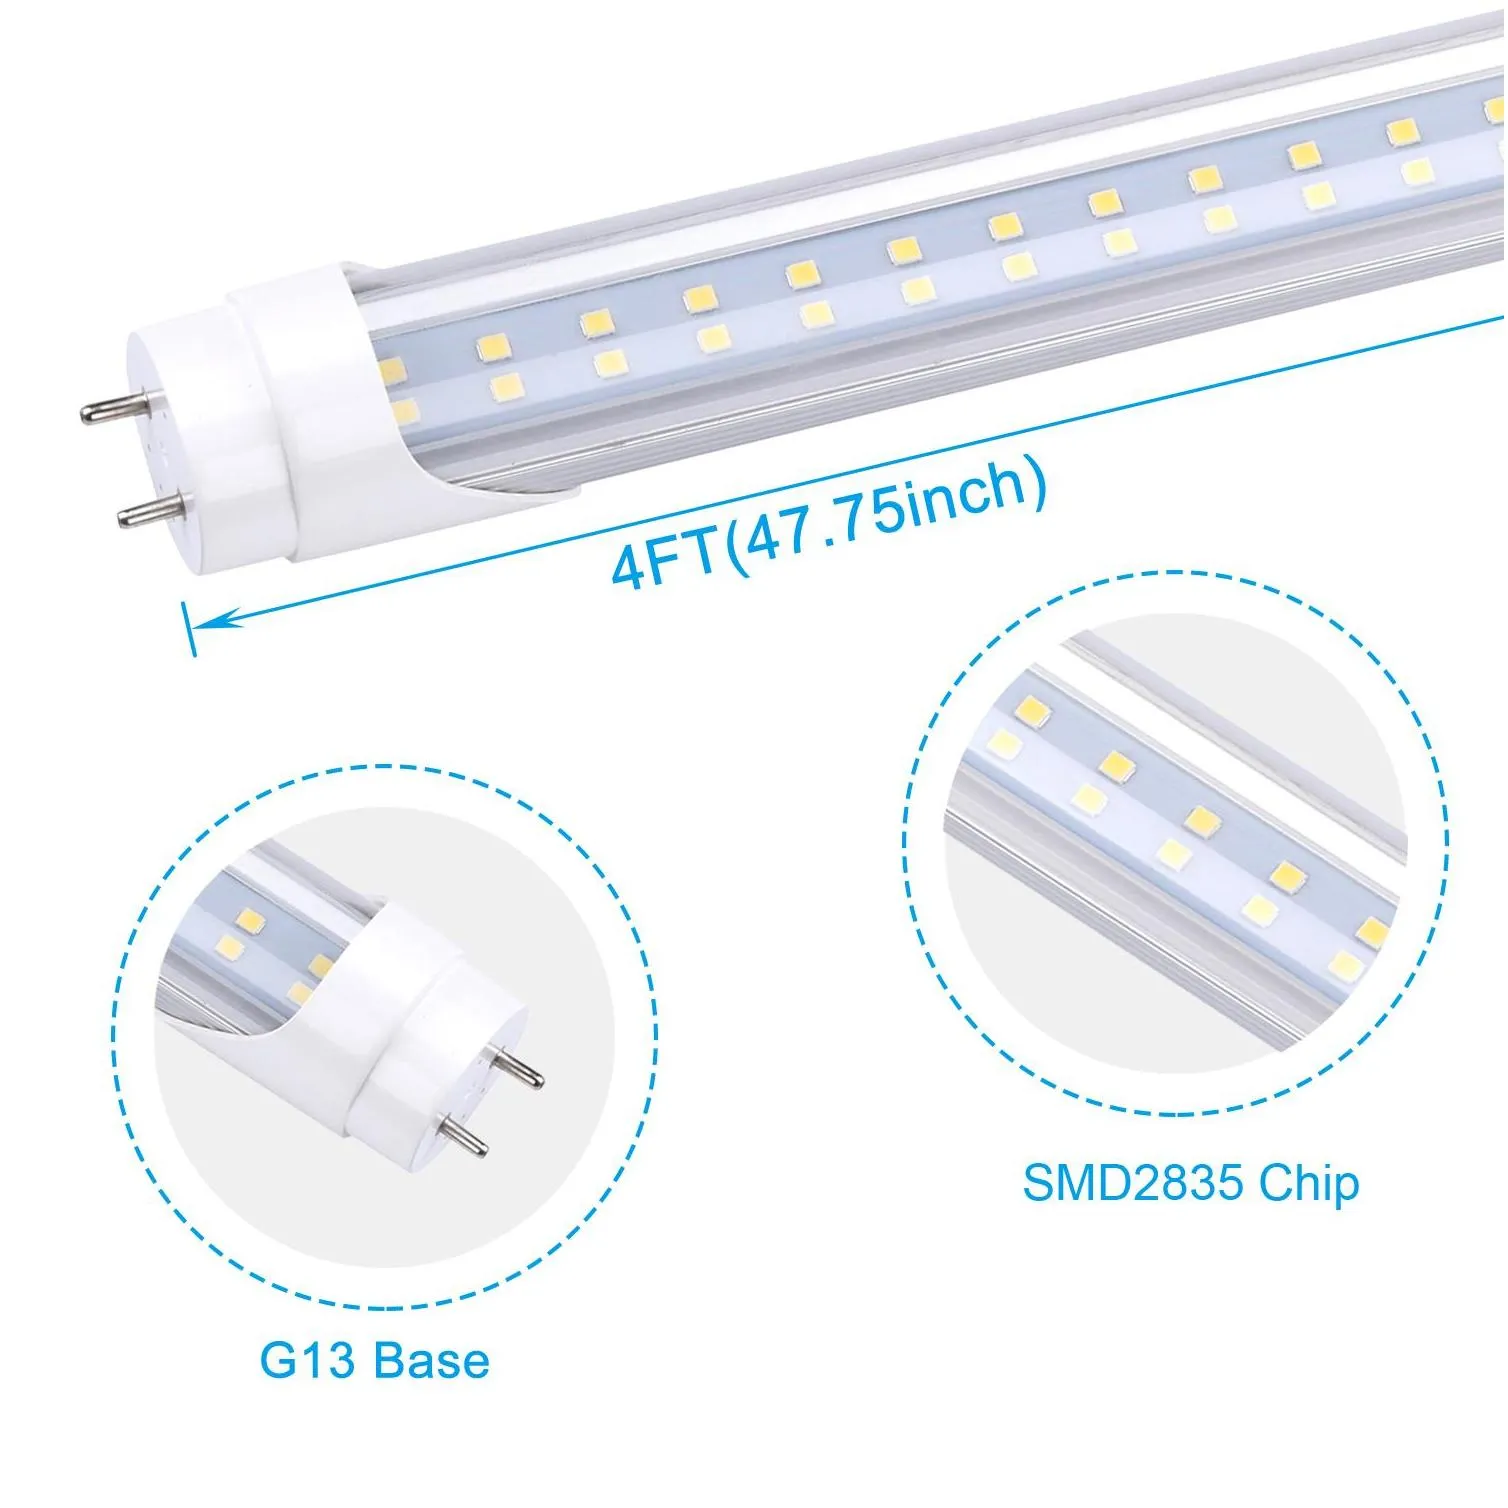 4ft t8 led tube 18w 22w 28w 4 feet g13 bi pin 4 garage lights 1.2m shop light fluorescent lamp replacement ballast removed dual ended